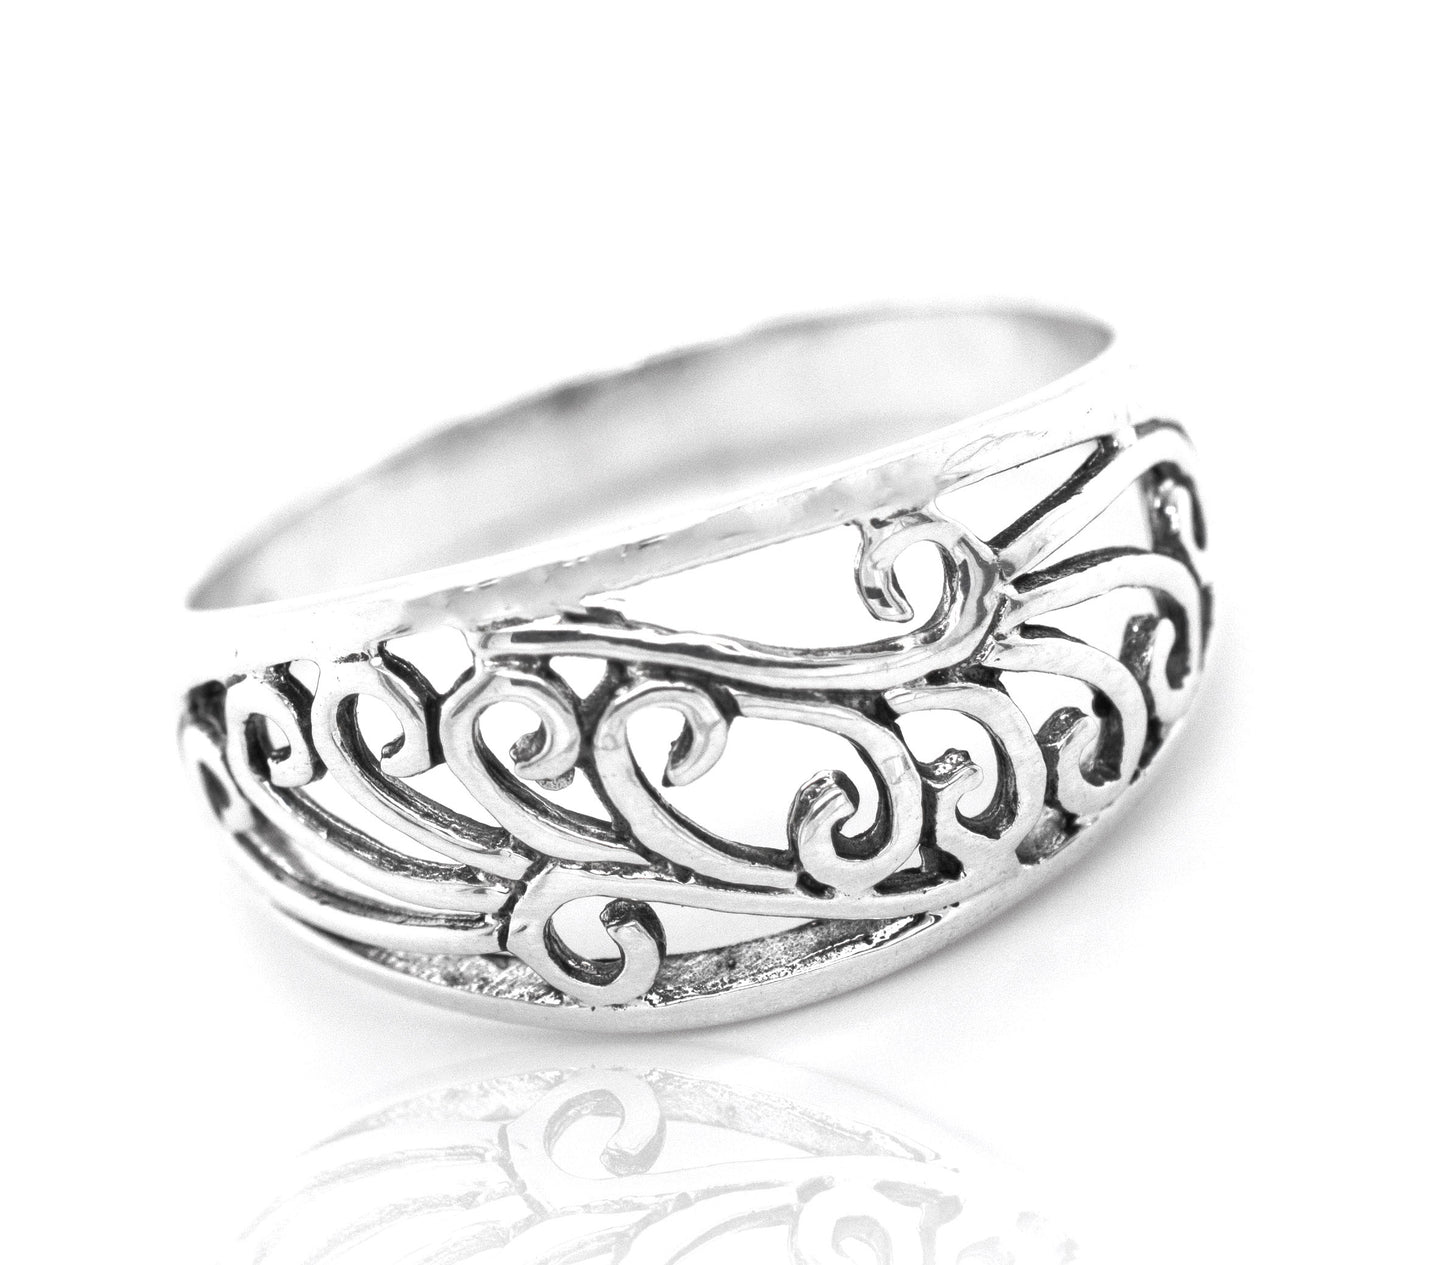 An art nouveau-styled Super Silver Sweeping Domed Filigree Ring with a swirl design.